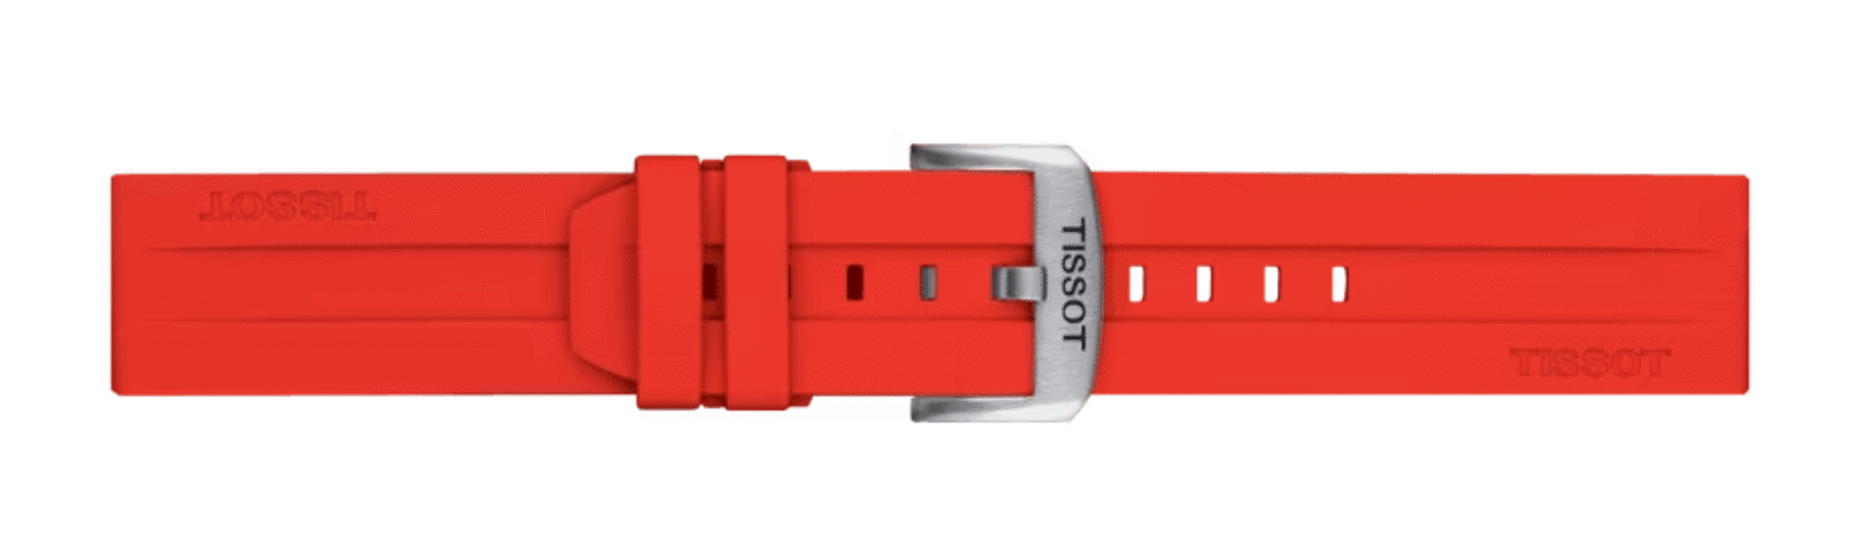 TISSOT OFFICIAL RED SILICONE STRAP LUGS 22 MM T852.047.920